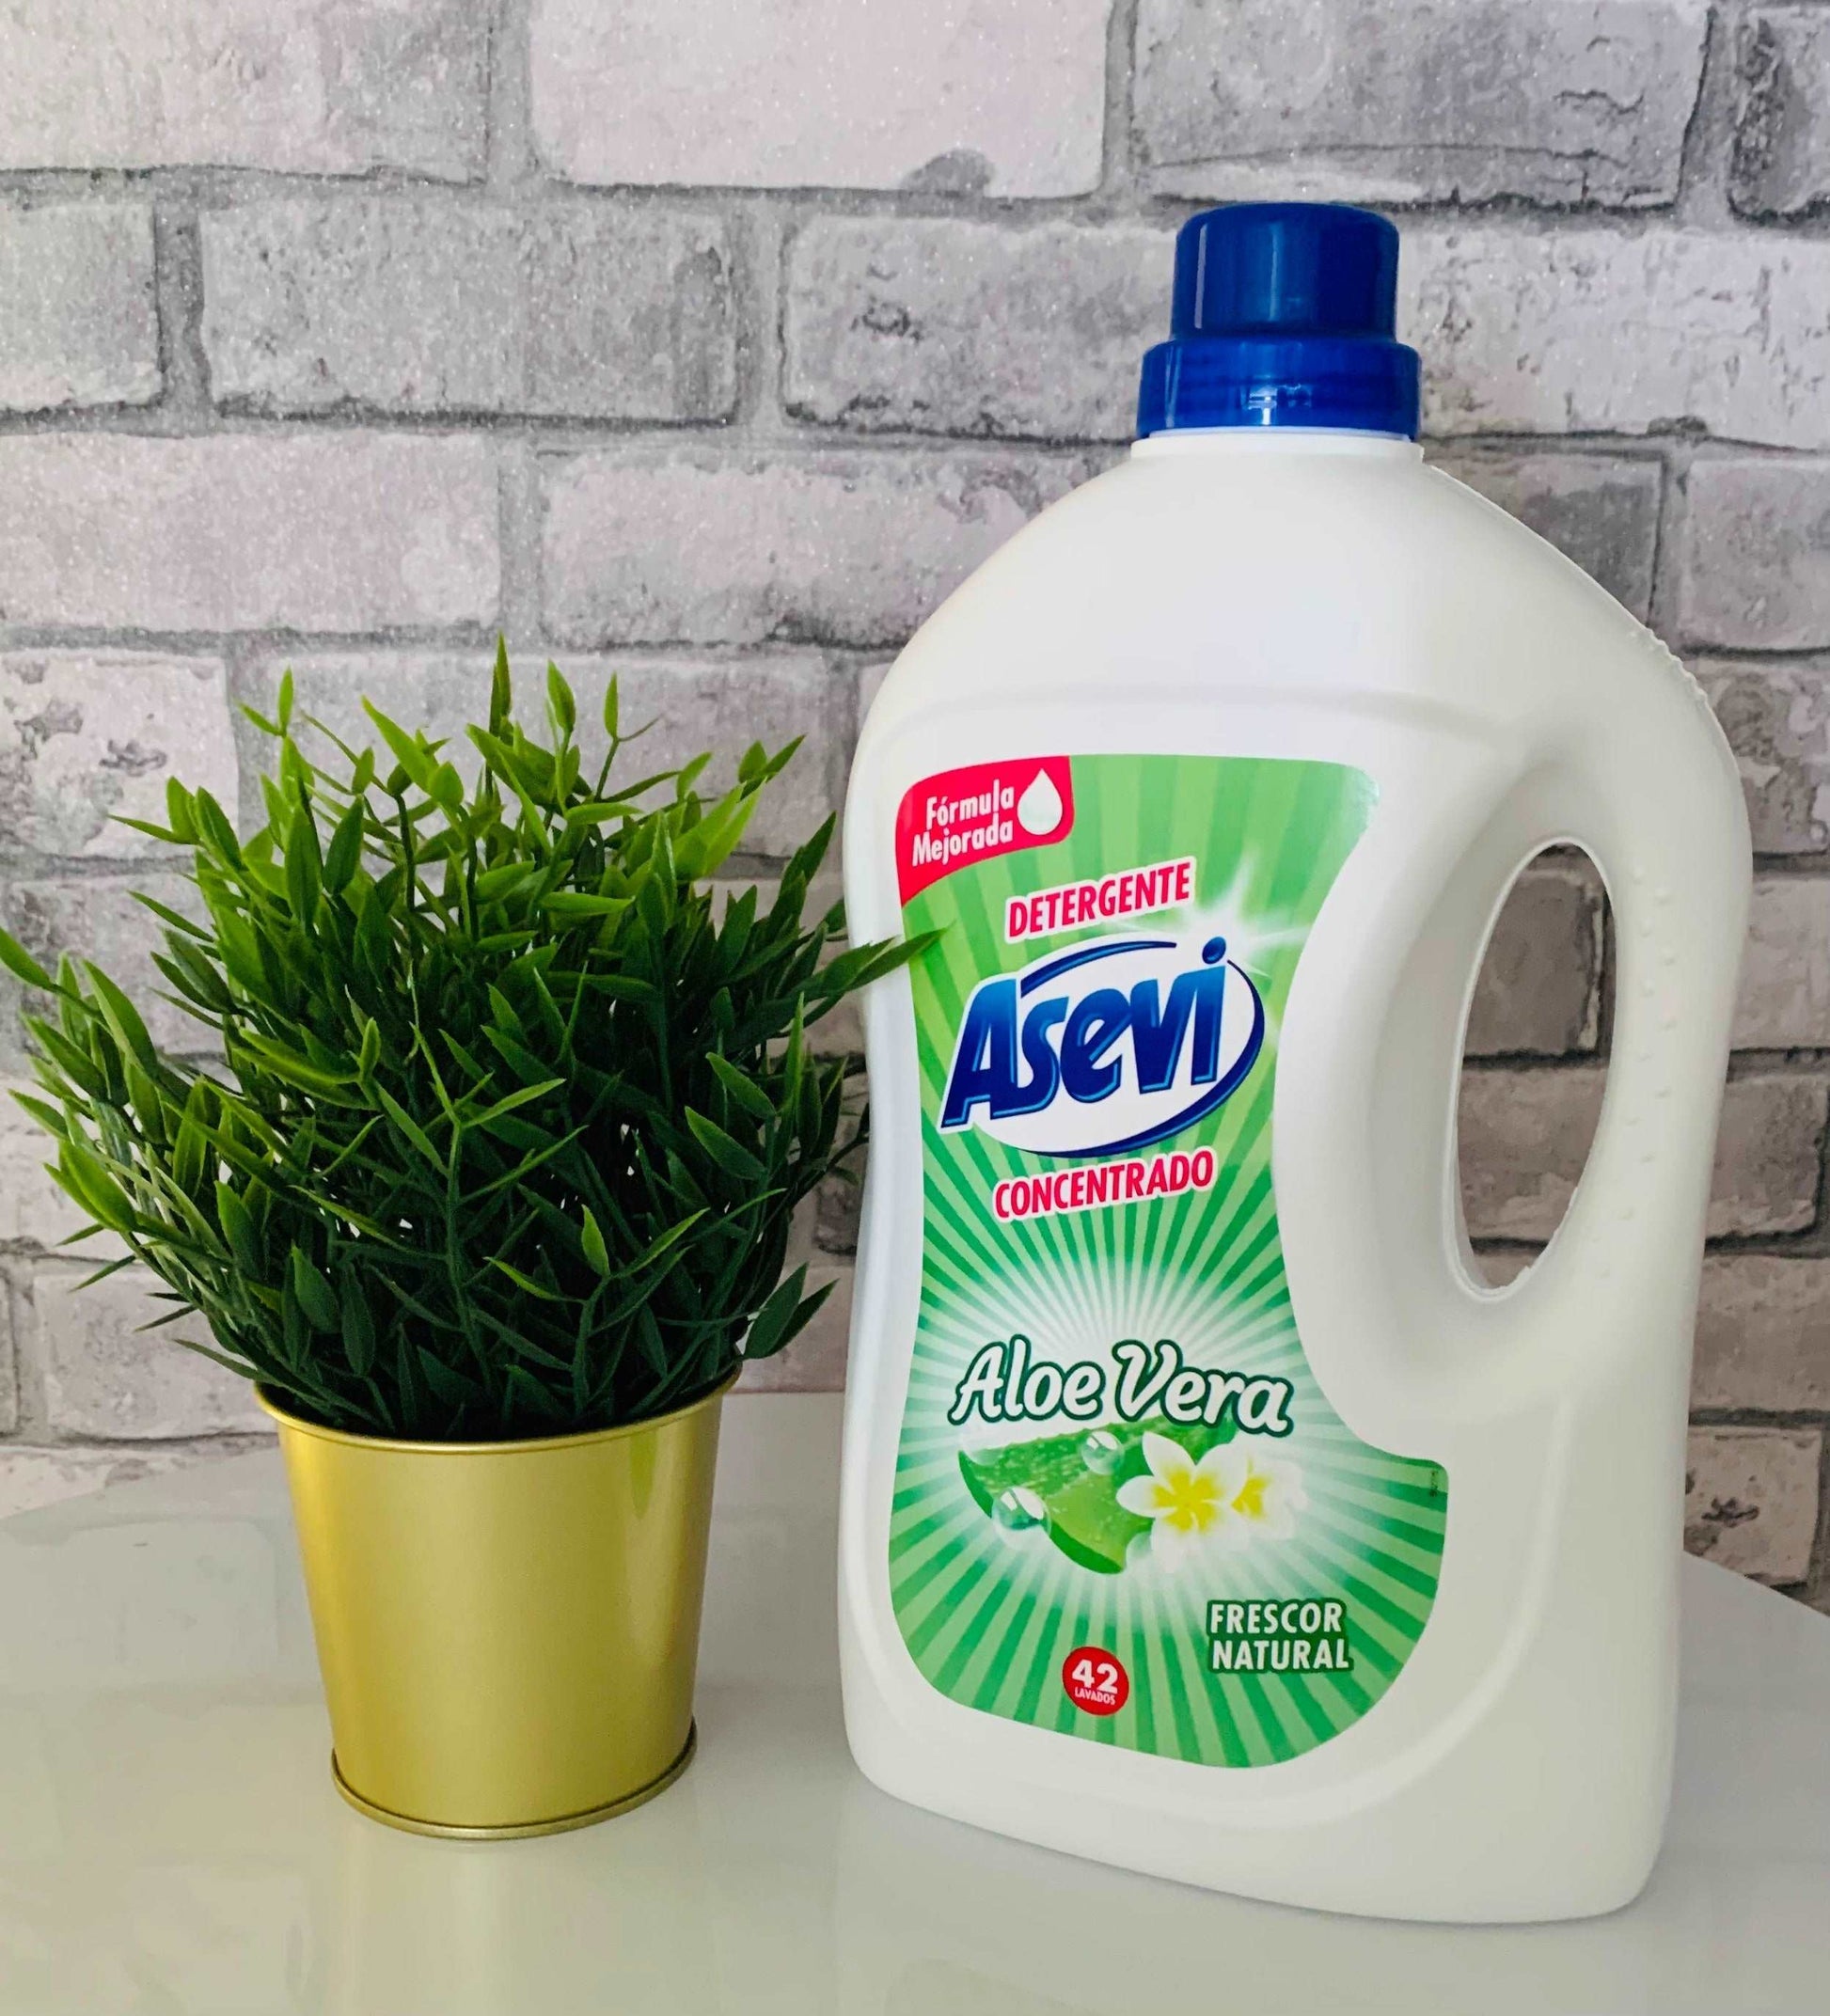 Asevi Aloe Vera - Concentrated Detergent costadelsouthport.com